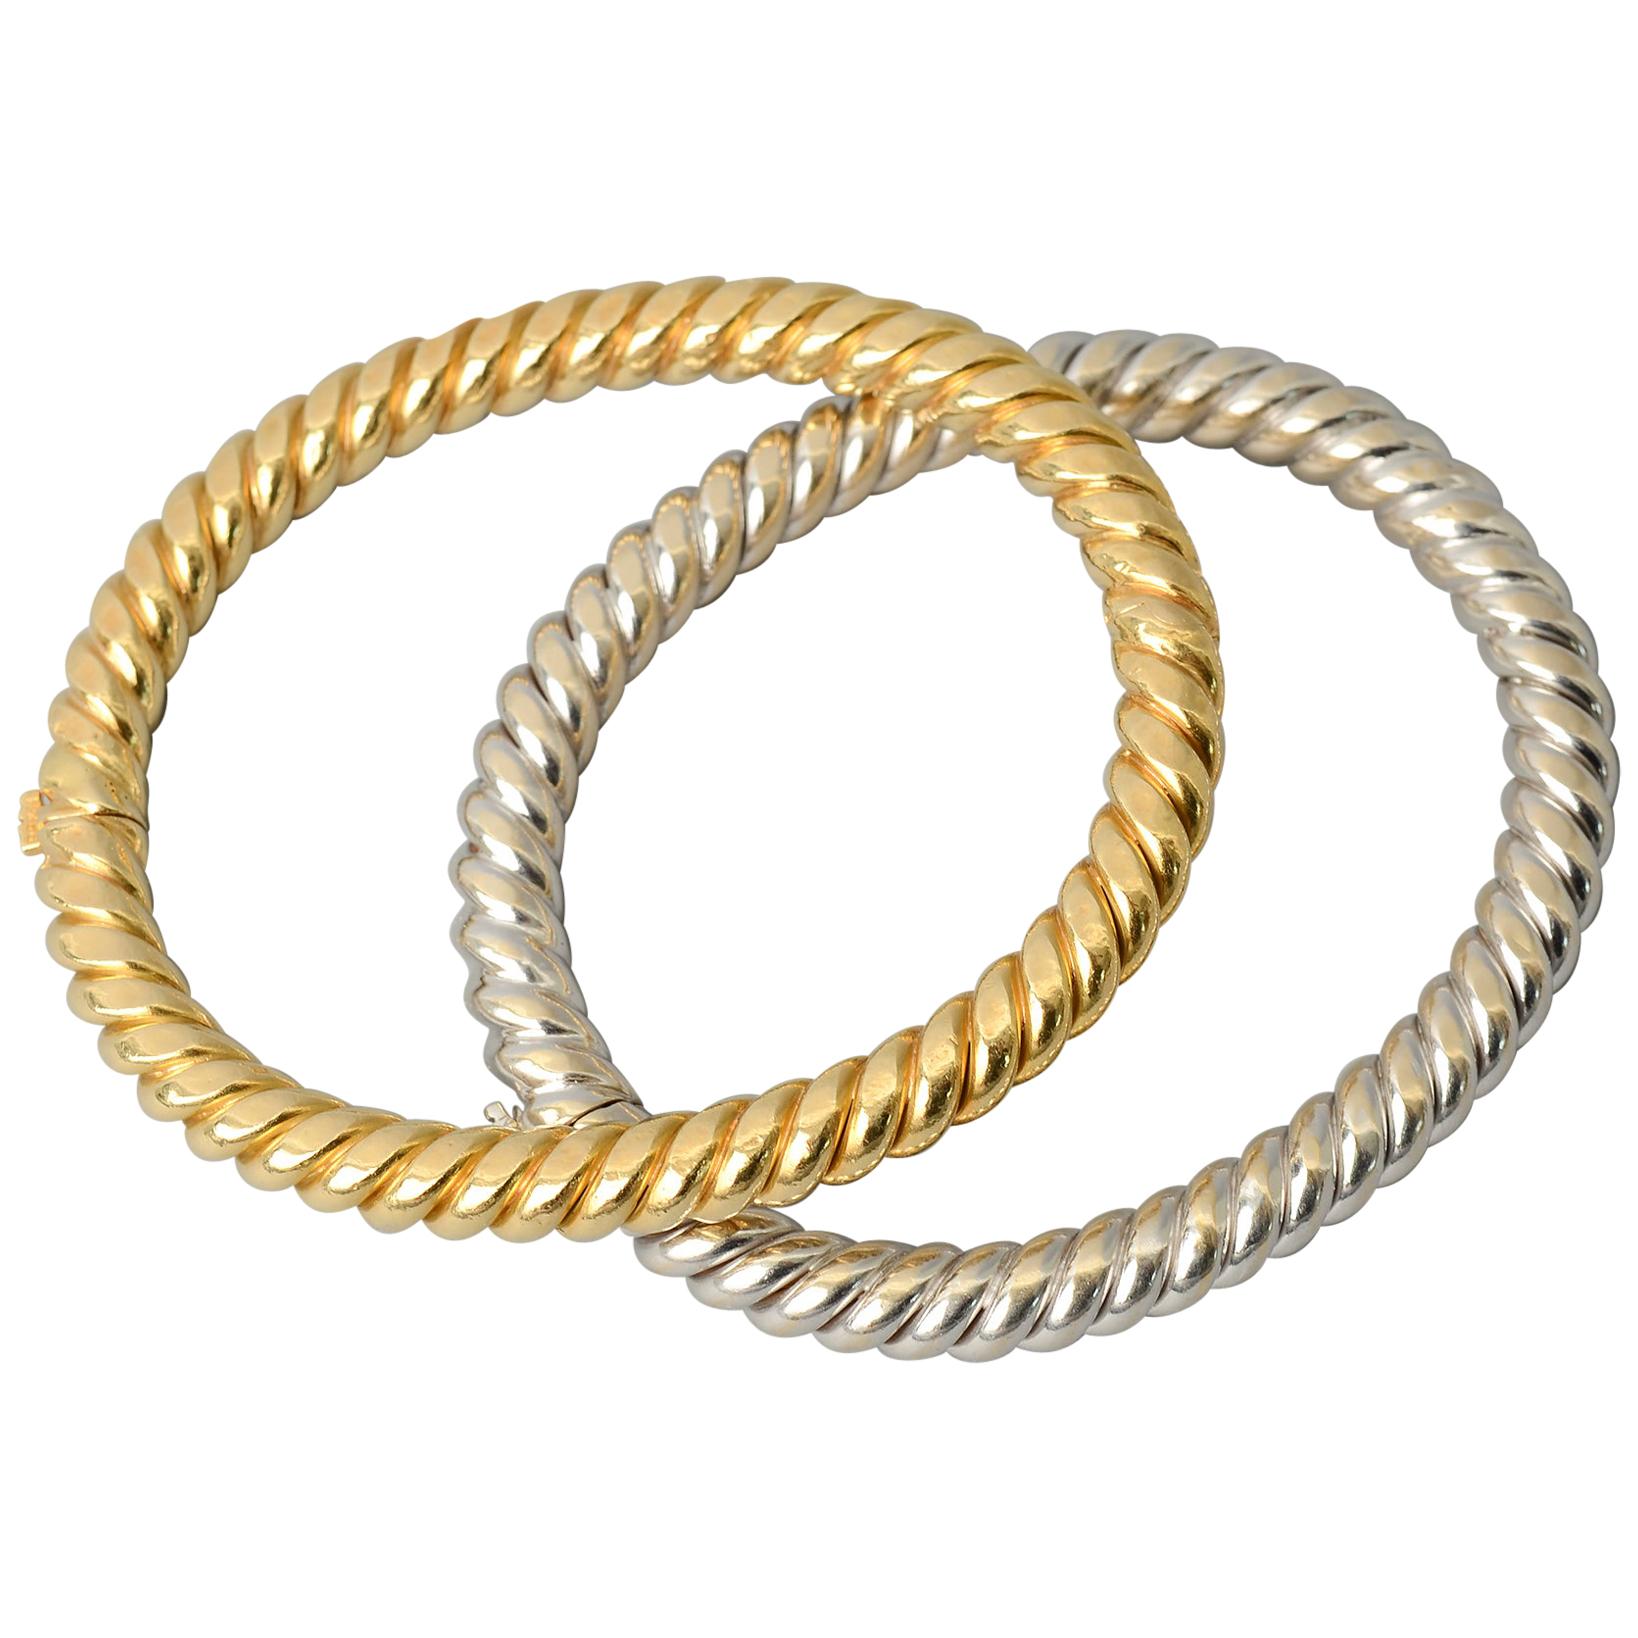 Van Cleef & Arpels Pair of Yellow and White Twisted Gold Bangle Bracelets